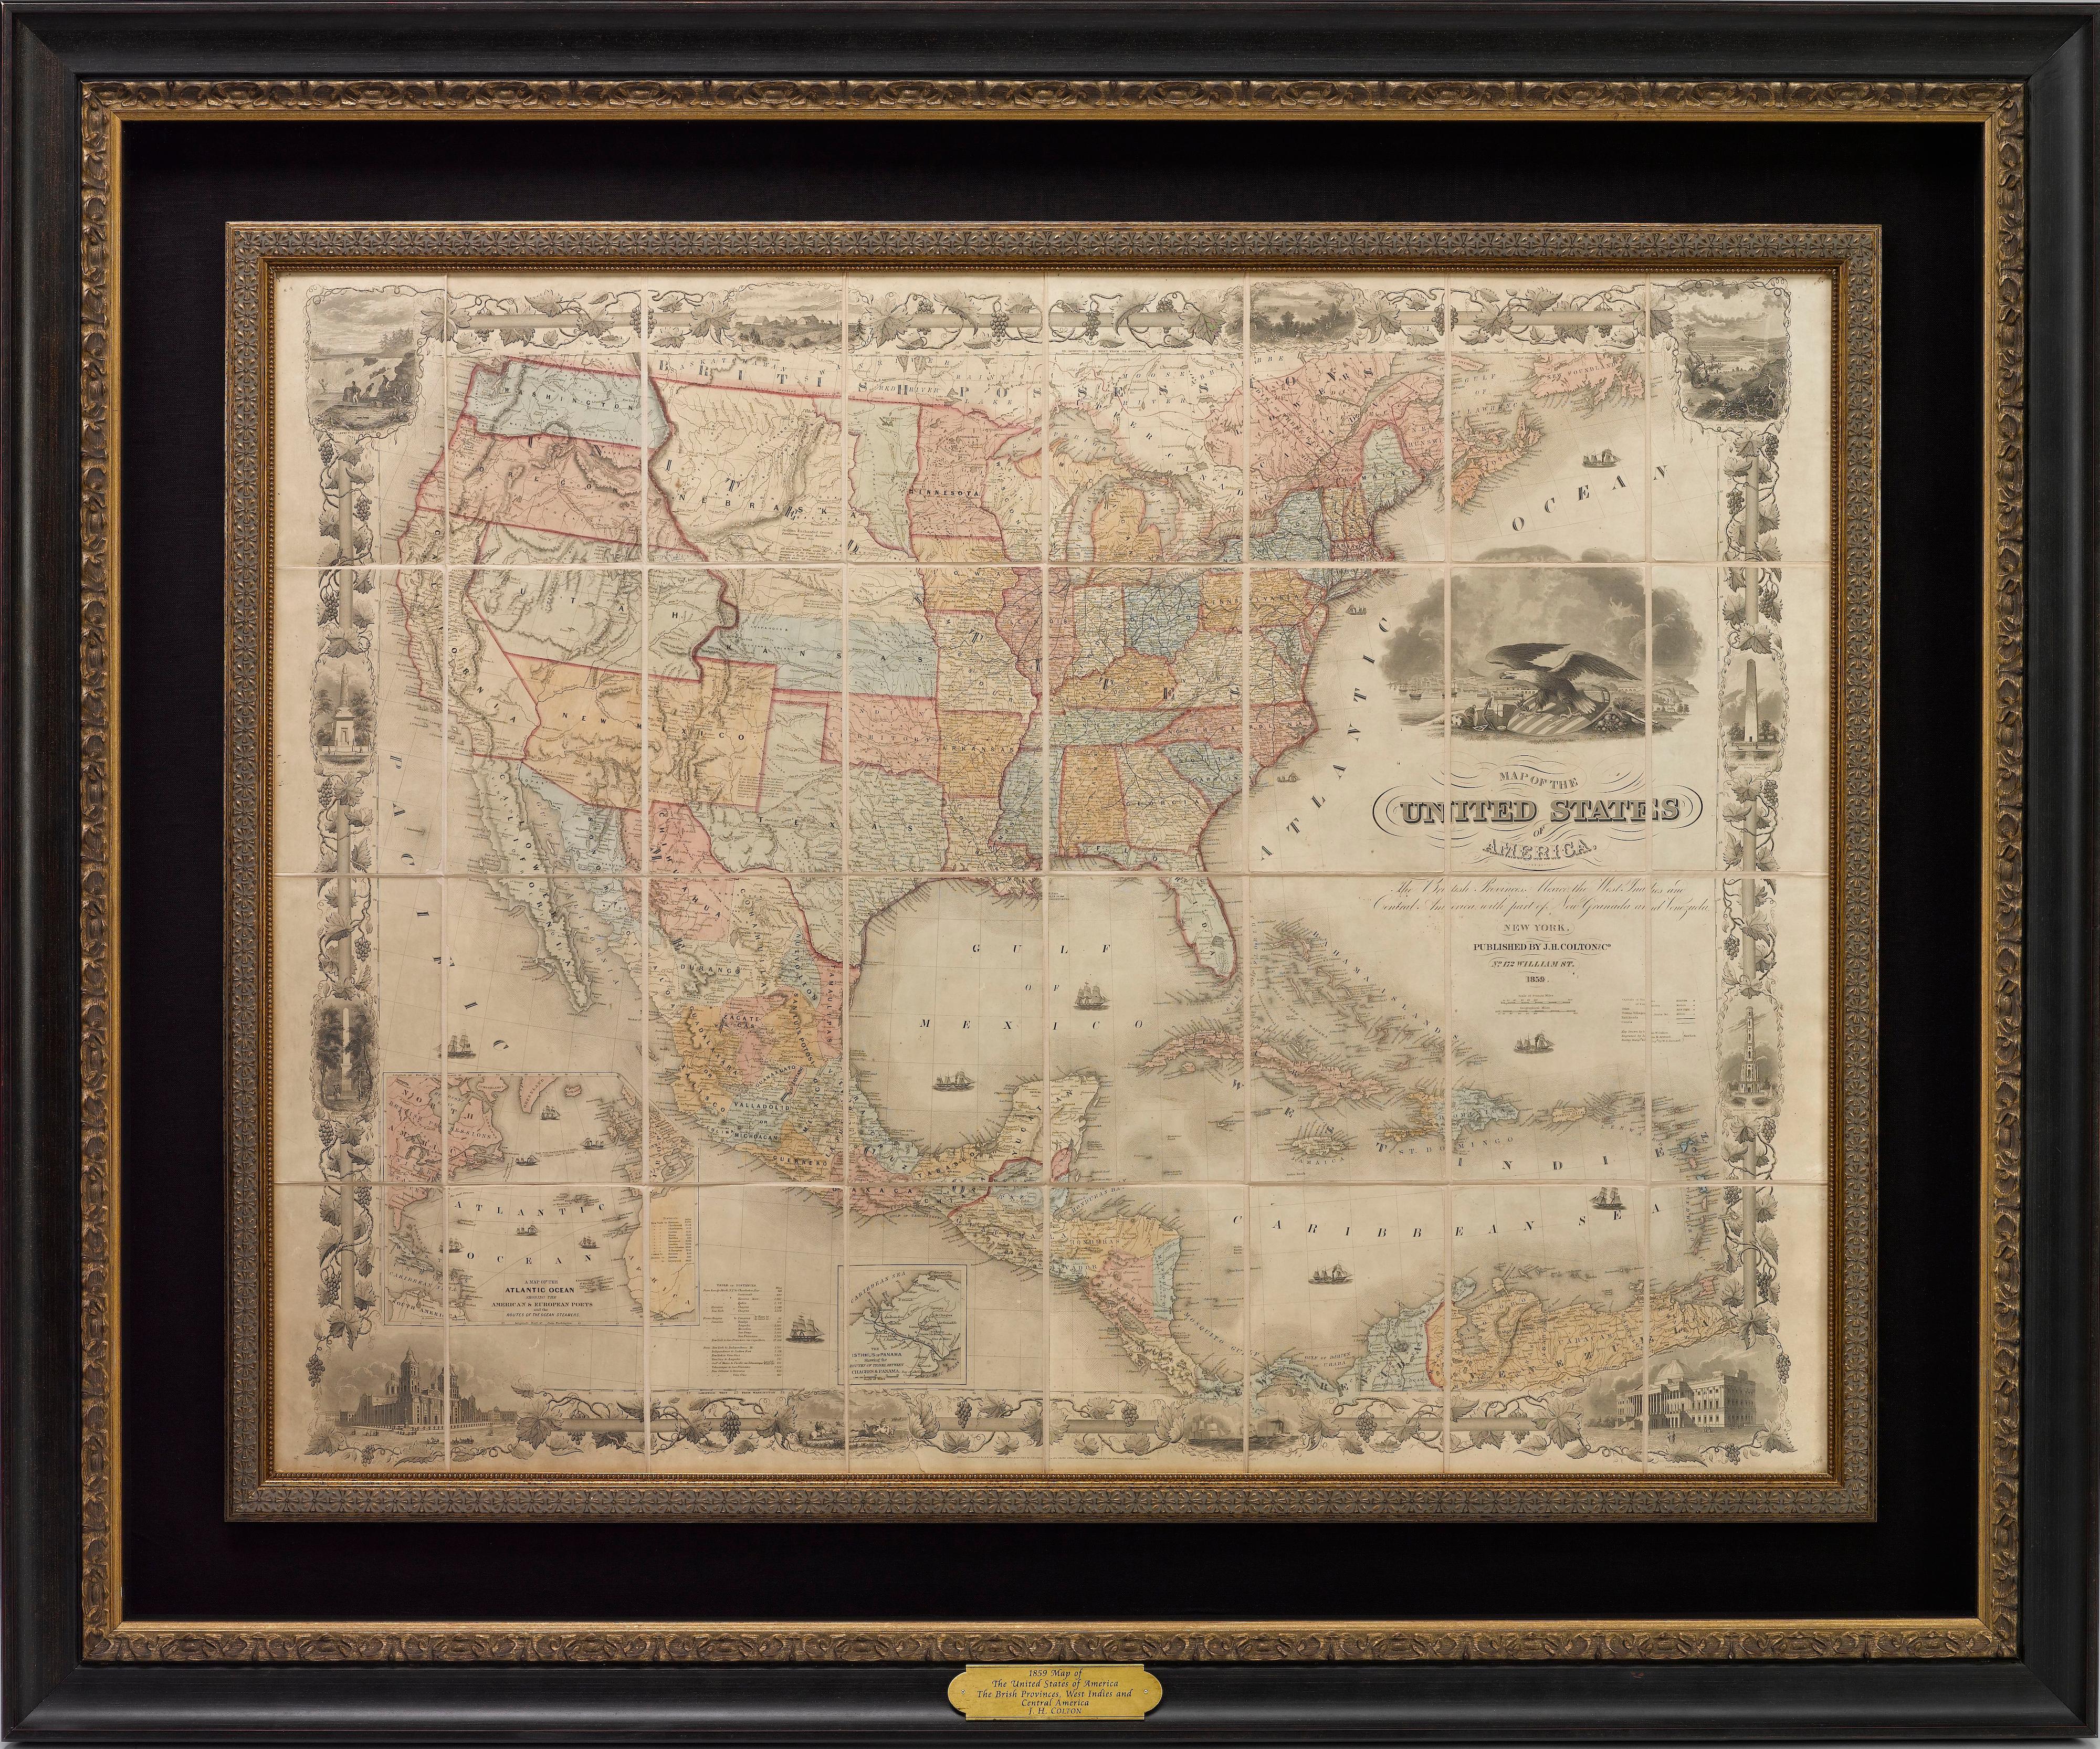 Presented is an 1859 “Map of the United States of America, the British Provinces, Mexico, the West Indies and Central America with Part of New Granada and Venezuela” by John Hutchinson Colton. First published in 1848, this map was updated in 1859